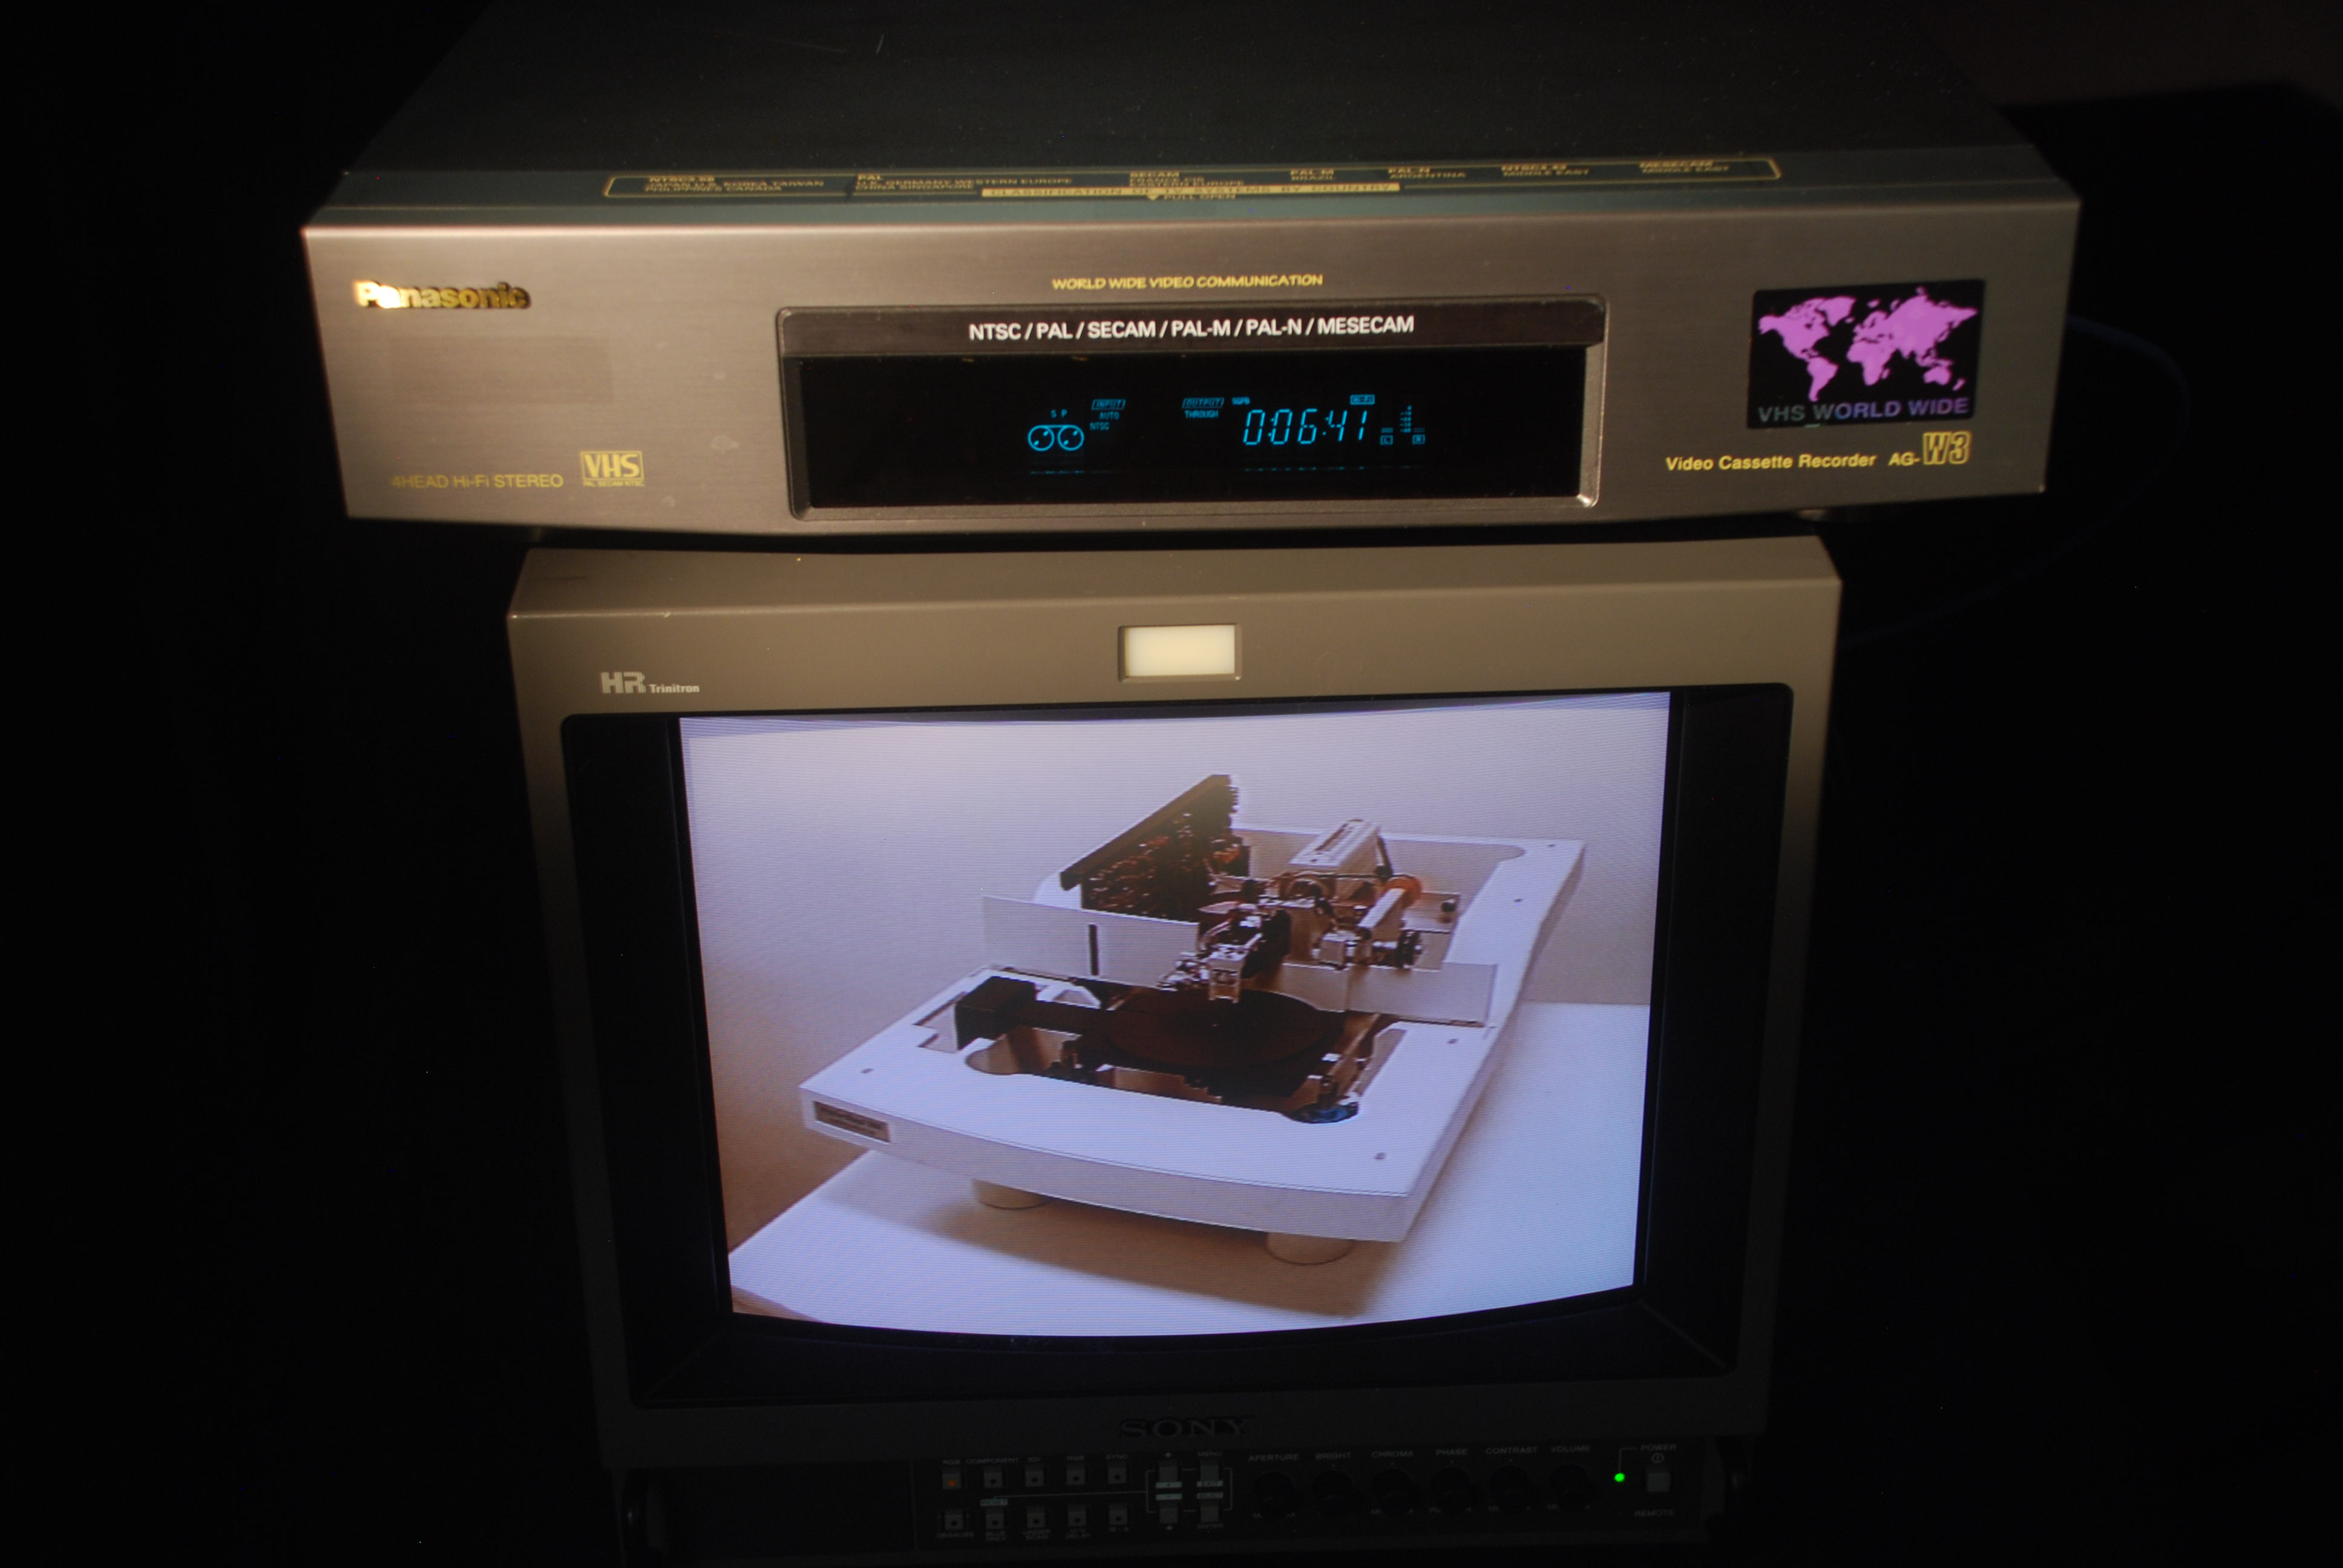 Panasonic AG-W3 “World VHS VCR”: Two available for Rent or Sale